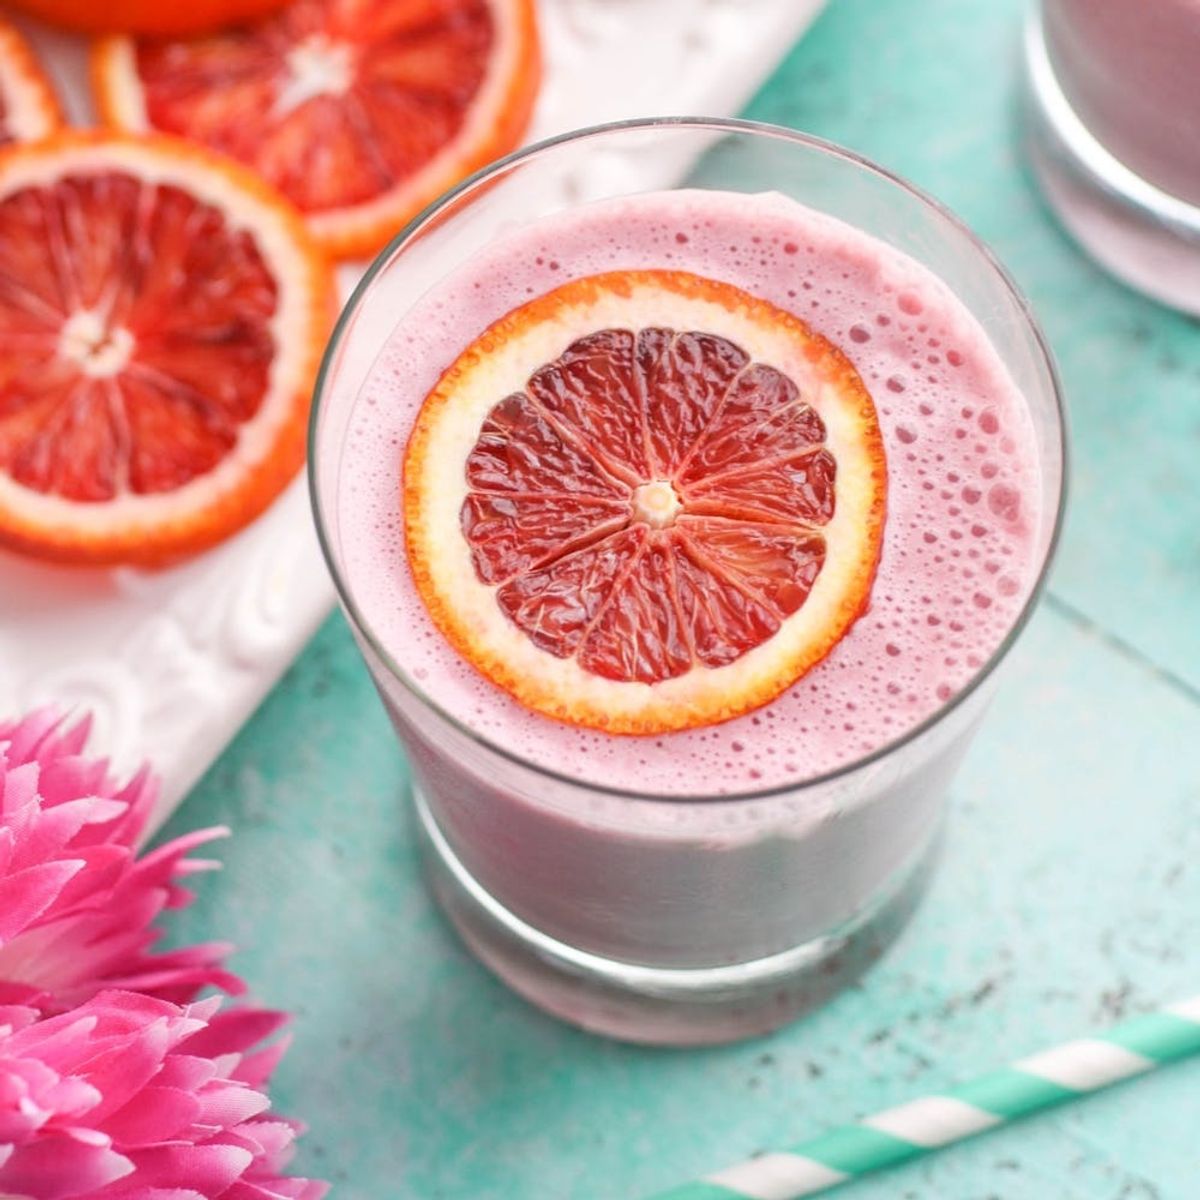 Perk Right Up in the Morning With This Blood Orange Smoothie Recipe